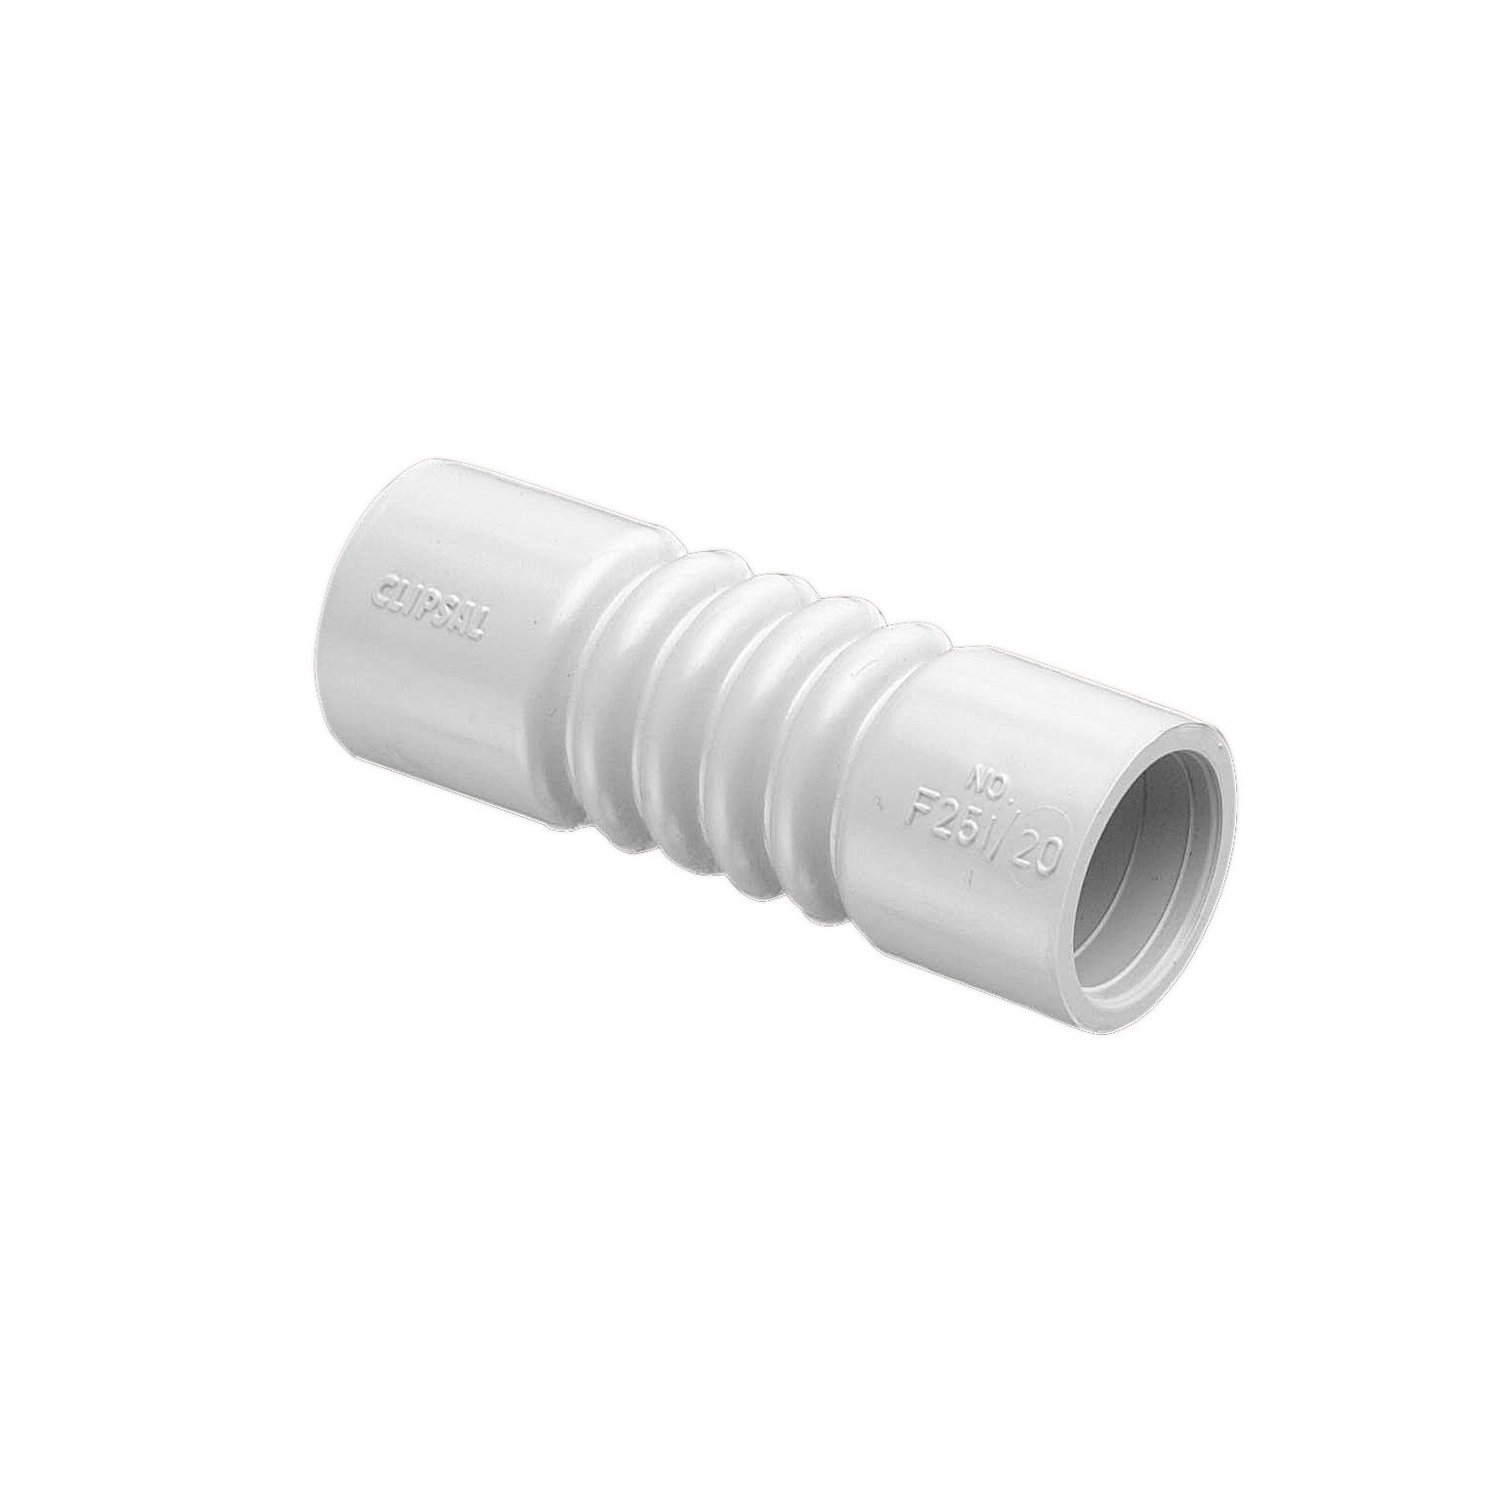 Solid Fittings - PVC, Expansion Couplings - Flexible, 20mm, Grey